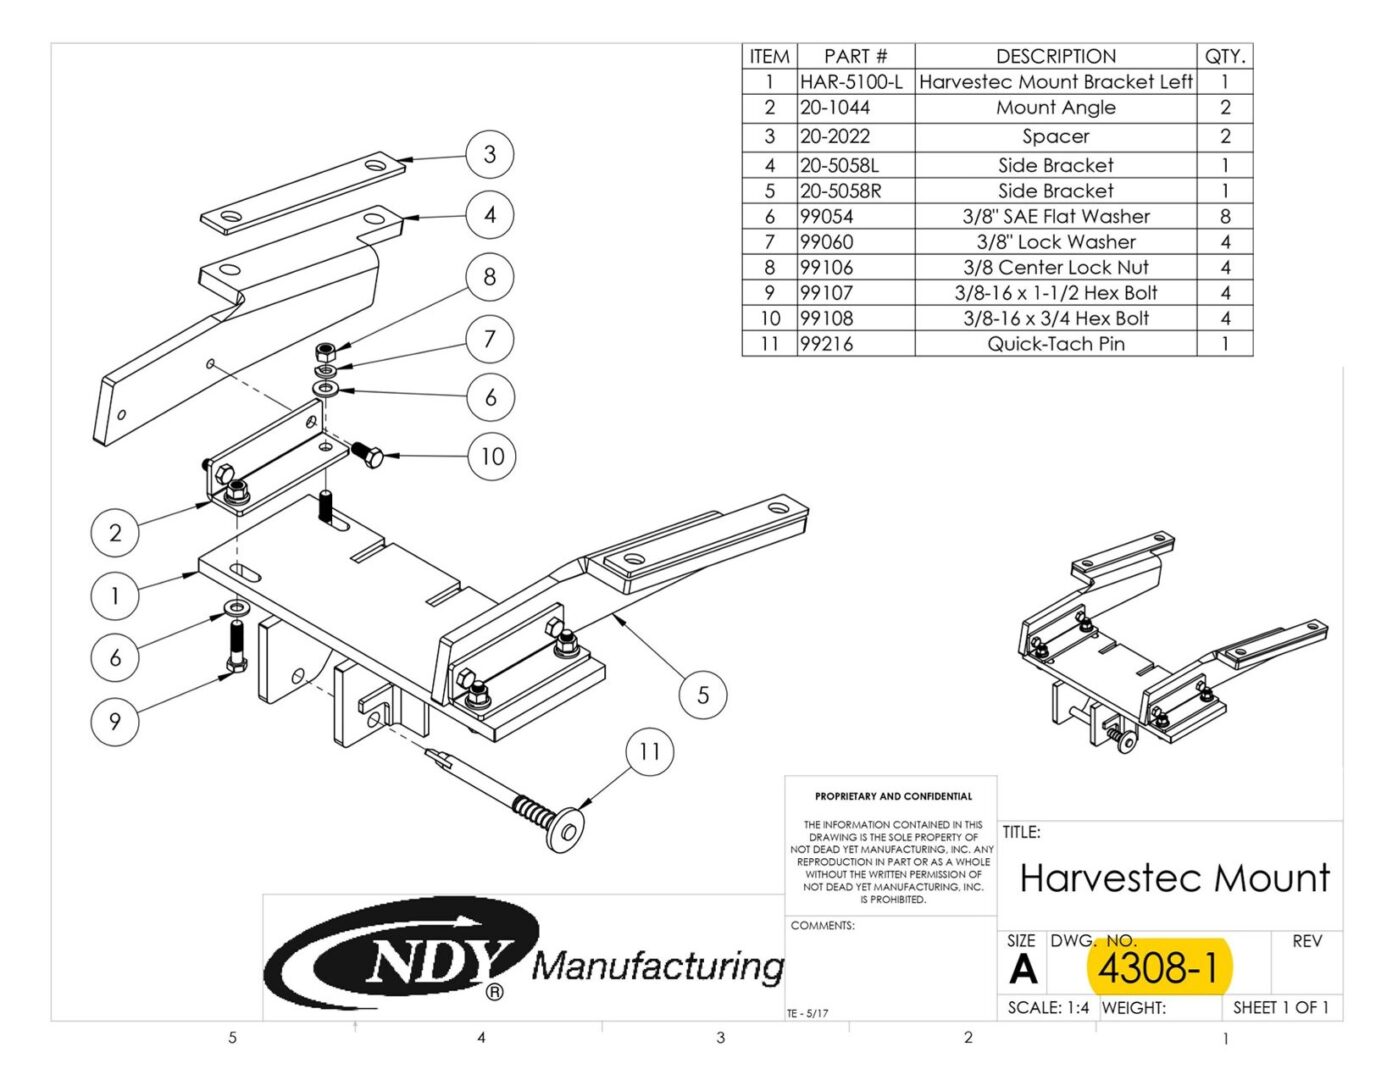 A diagram showing the parts of the Stalk Stomper Mount Assembly for Rows 1 and 3 on Harvestec 4308 Series Corn Head.